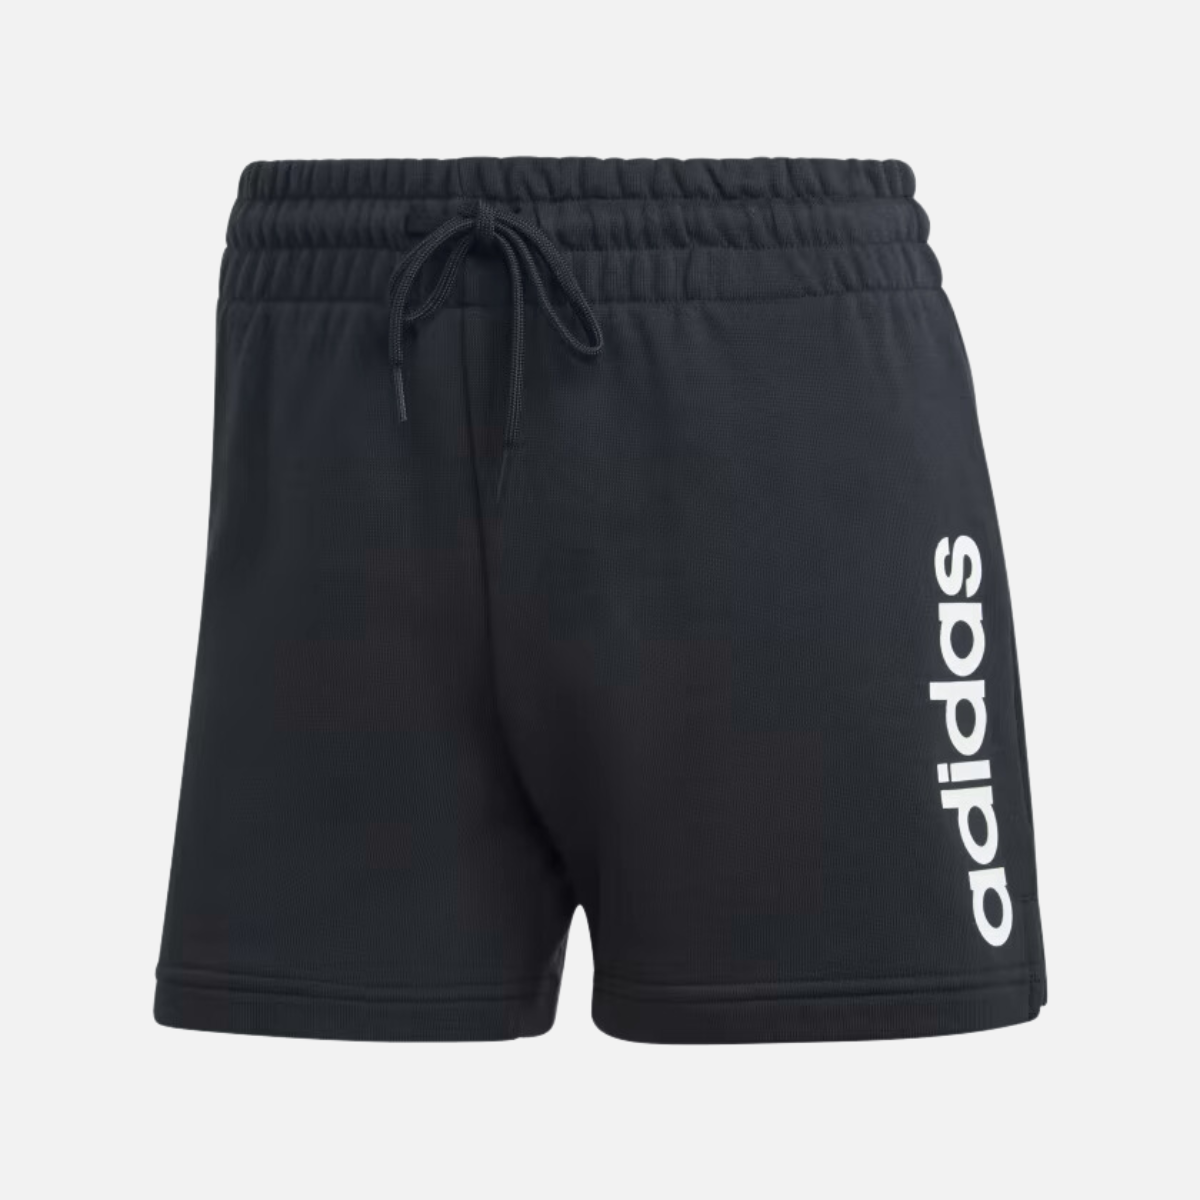 Adidas Essentials Linear French Terry Women's Shorts -Black/White